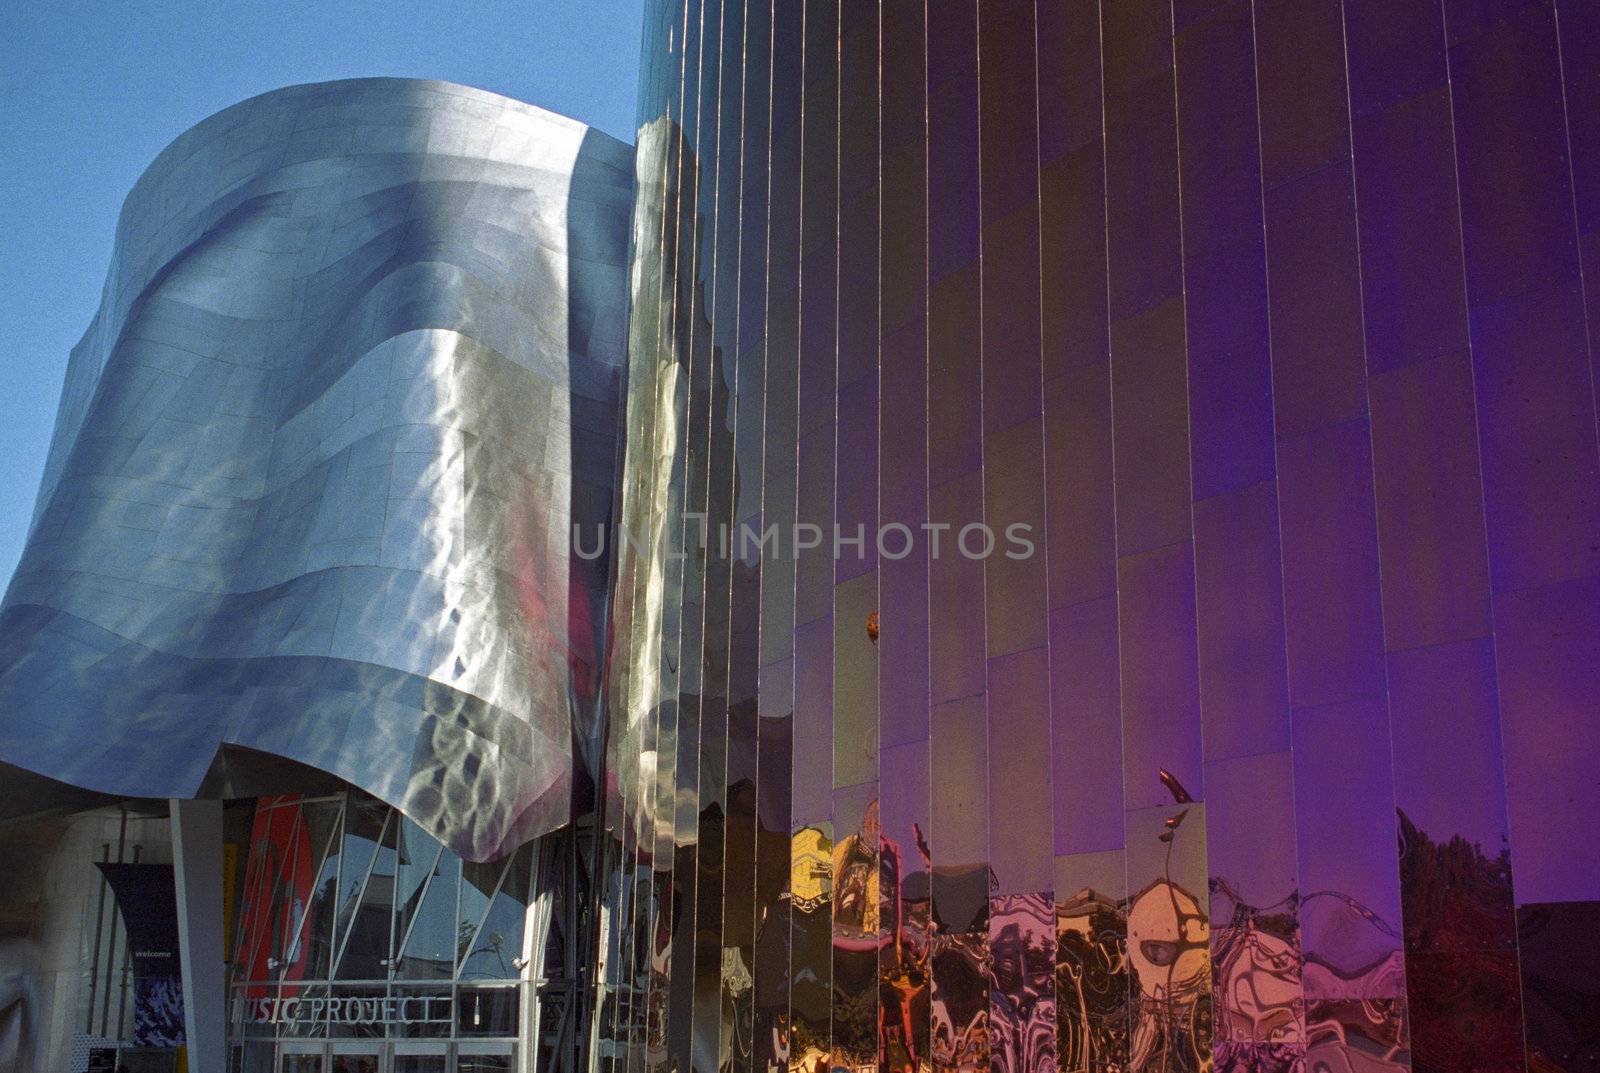 The Experience Music Project in Seattle by pjhpix